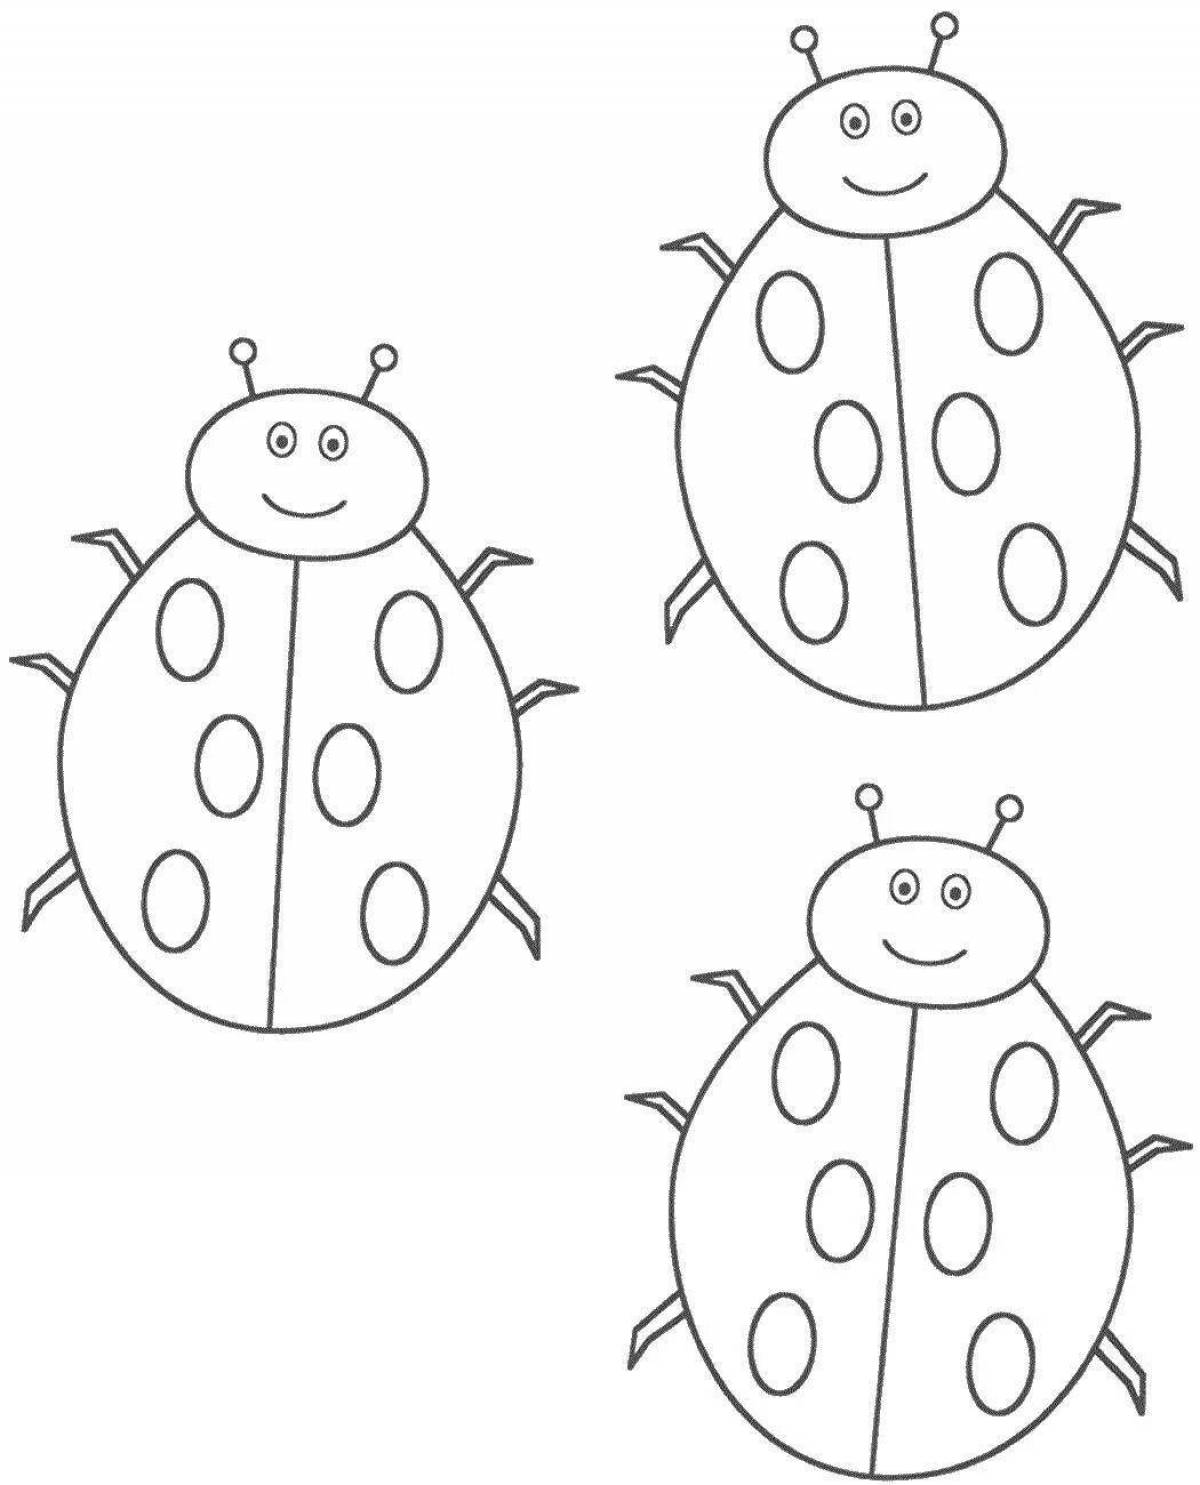 A lovely ladybug coloring book for kids